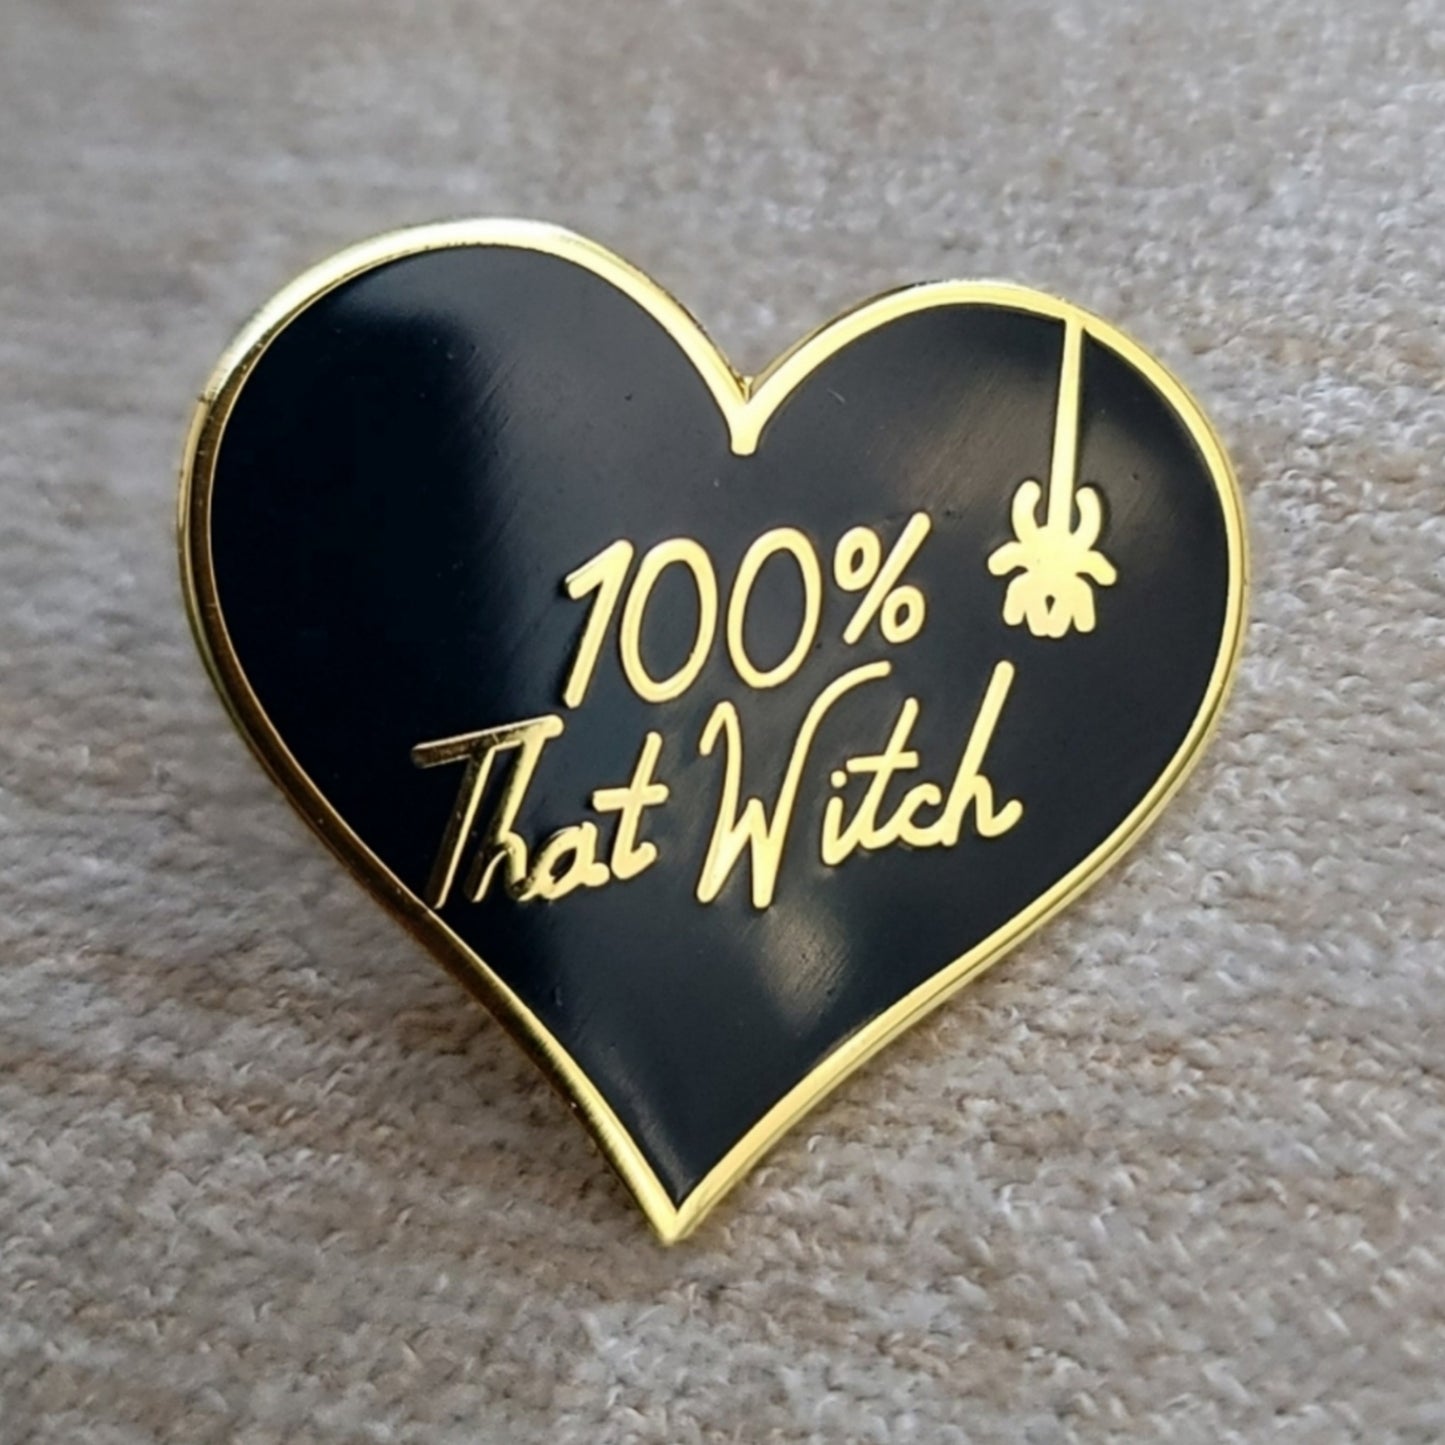 Enamel Lapel Pin | 100% That Witch | Black Heart ♡ With Gold Accents Metal Pin - A Gothic Universe - Lapel Pins